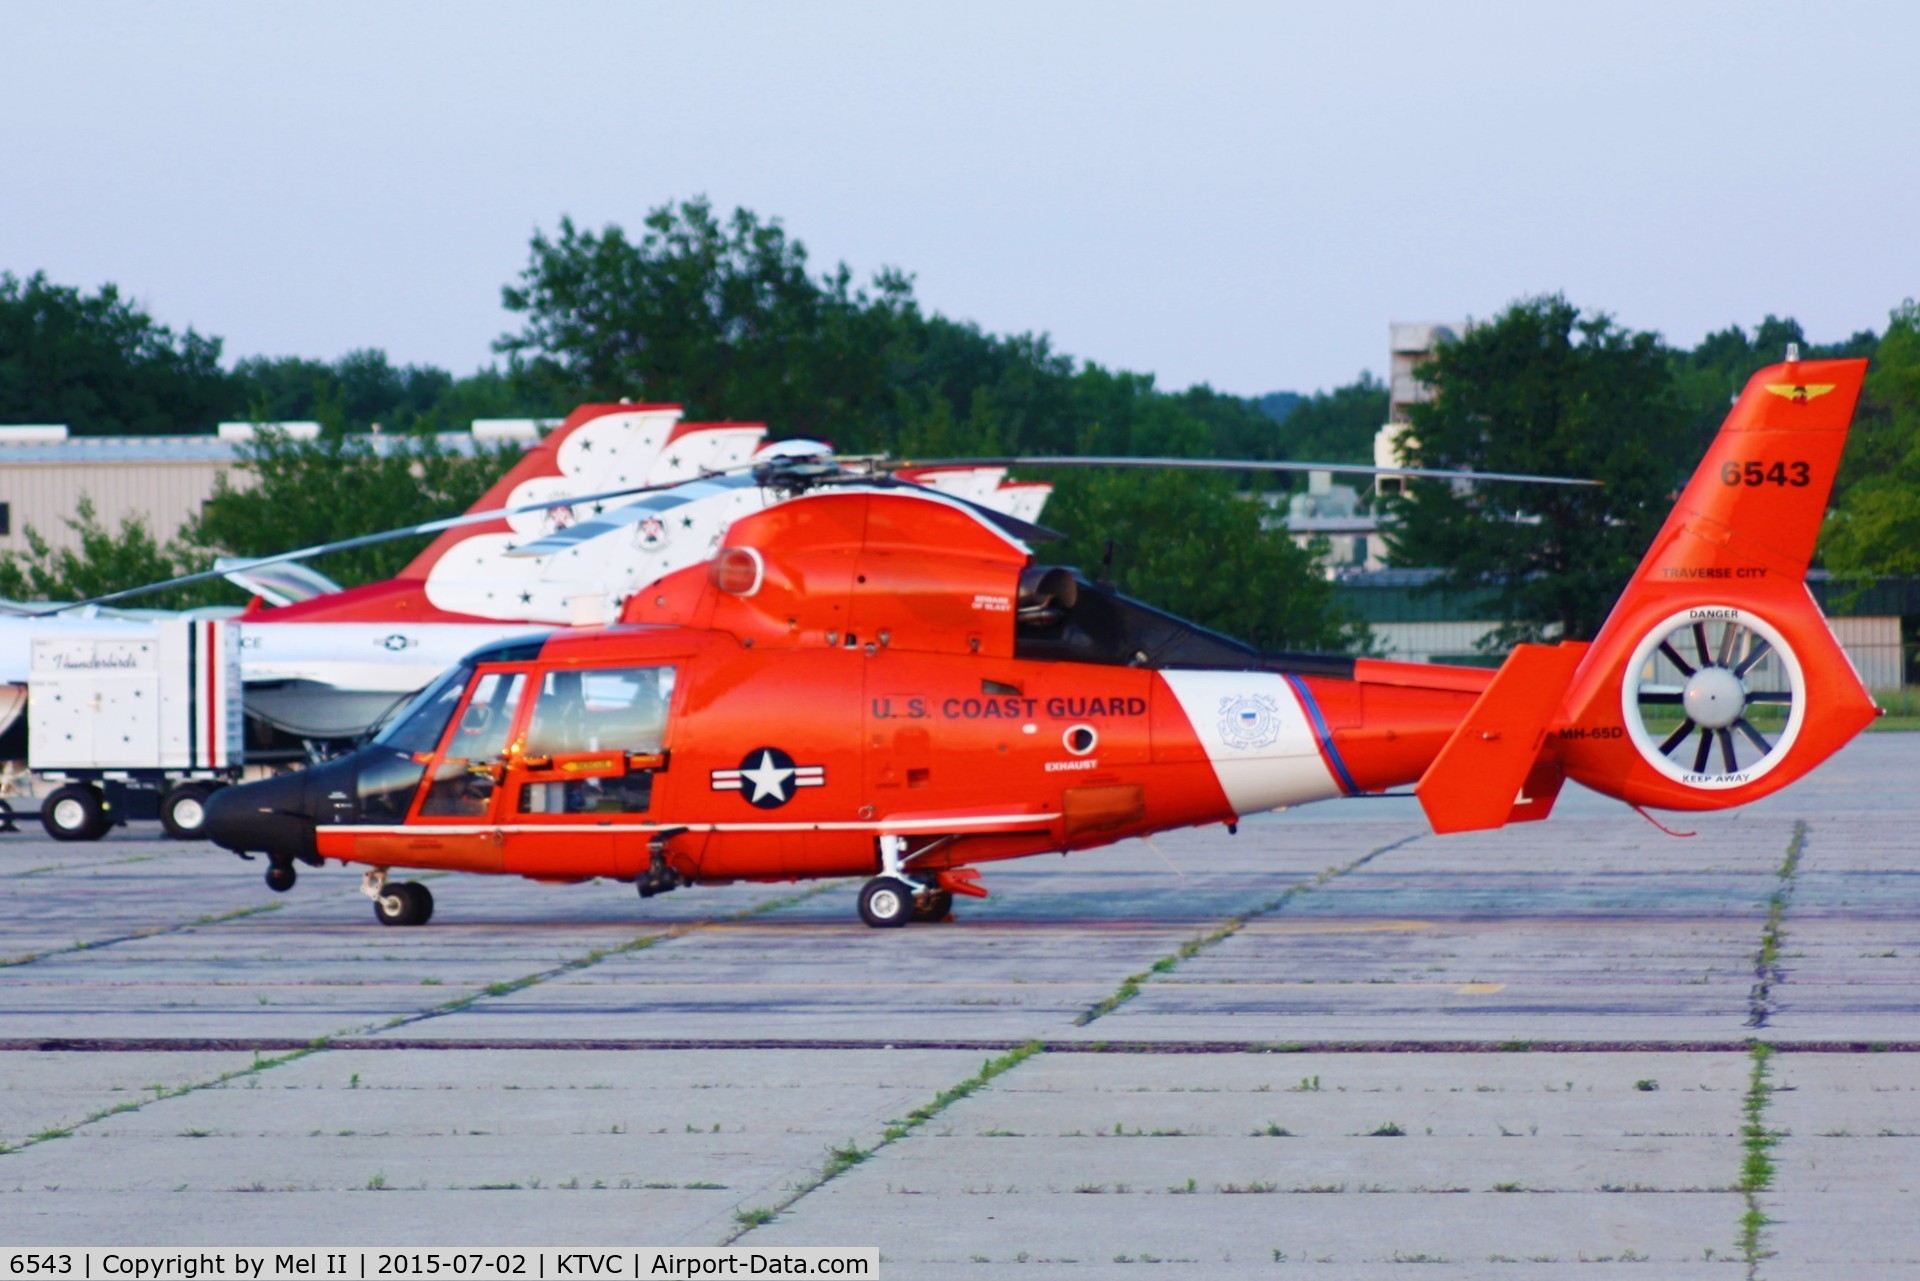 6543, Aérospatiale HH-65A Dolphin C/N 6025, Parked at USCG Air Station Traverse City.